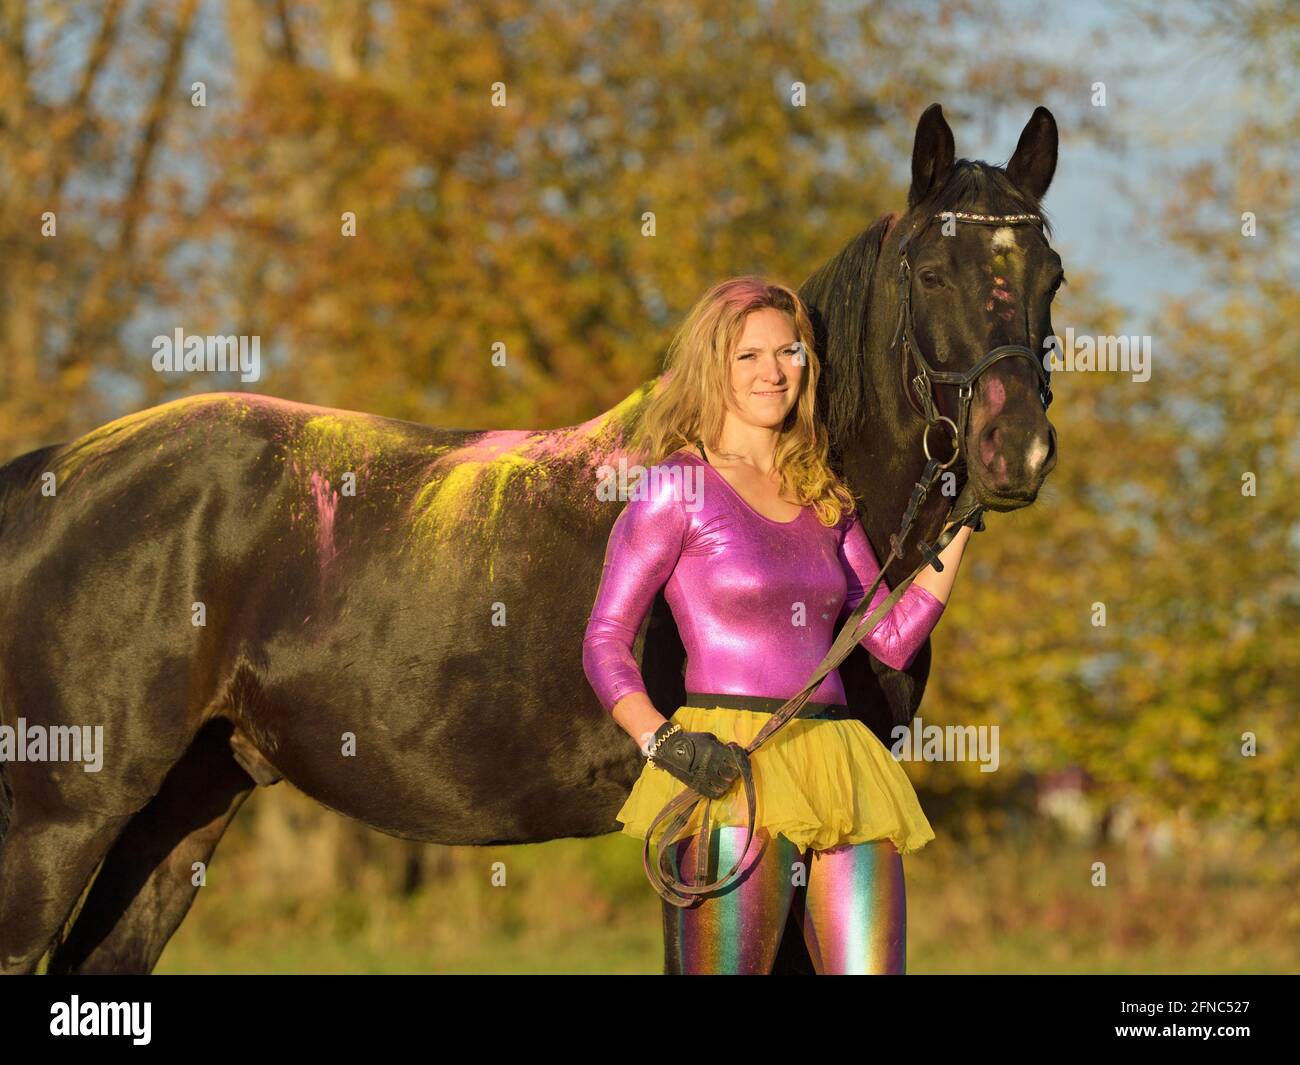 Rider wearing a very special colorful outfit, just for having fun Stock Photo